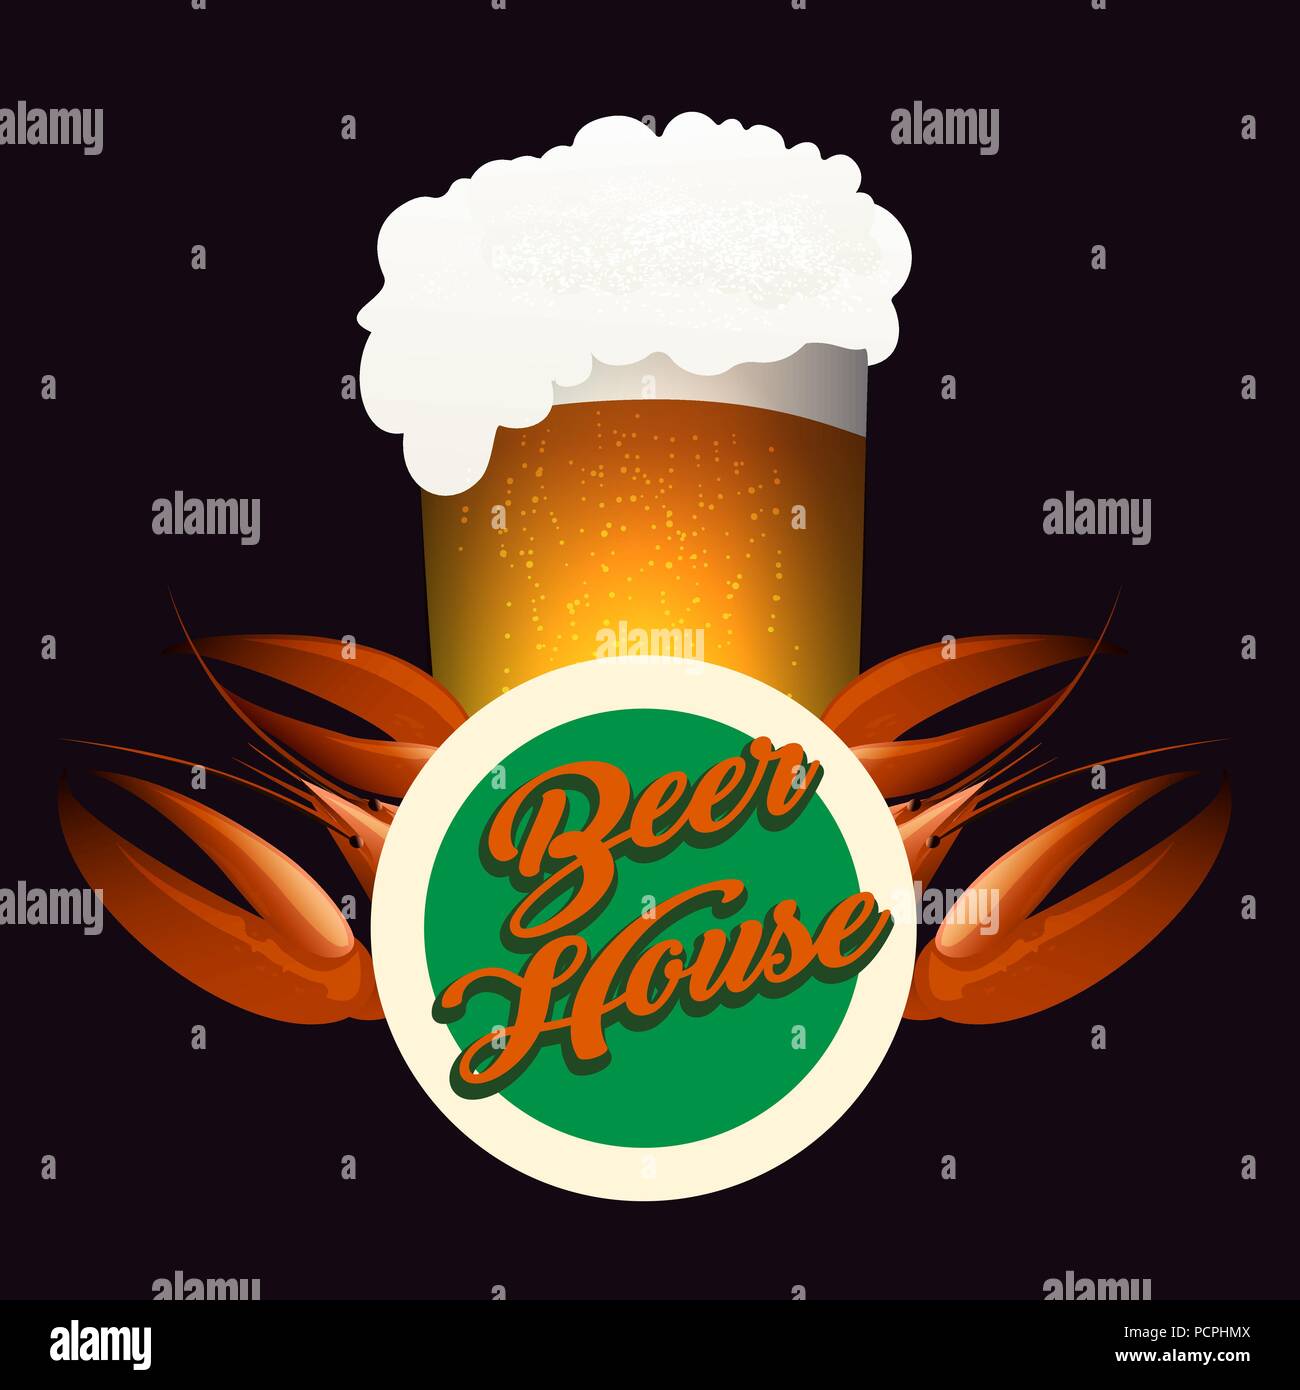 Pub or Beer House Emblem. Glass full of beer and boiled crawfish. Vector illustration. Stock Vector